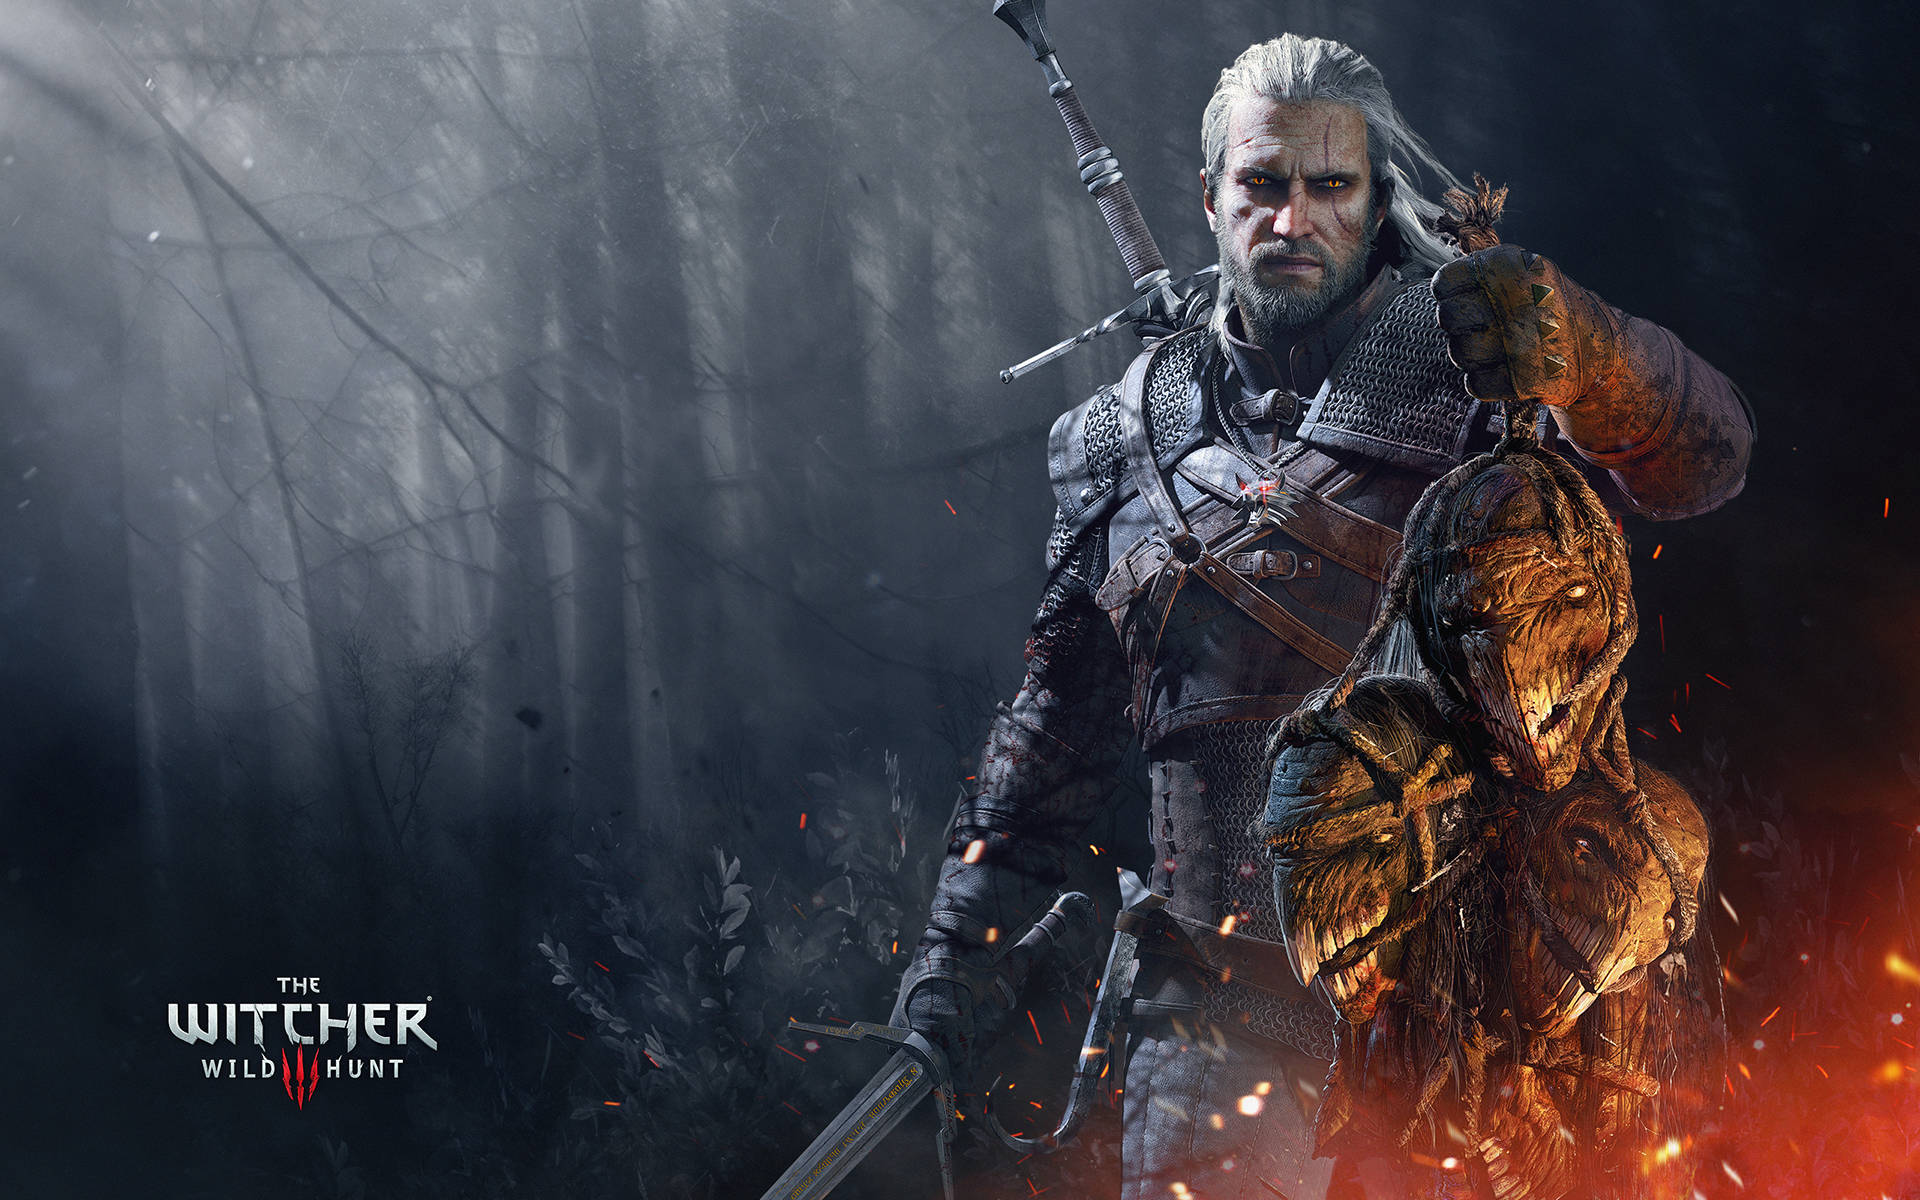 Fight for Justice - Geralt of Rivia Wallpaper